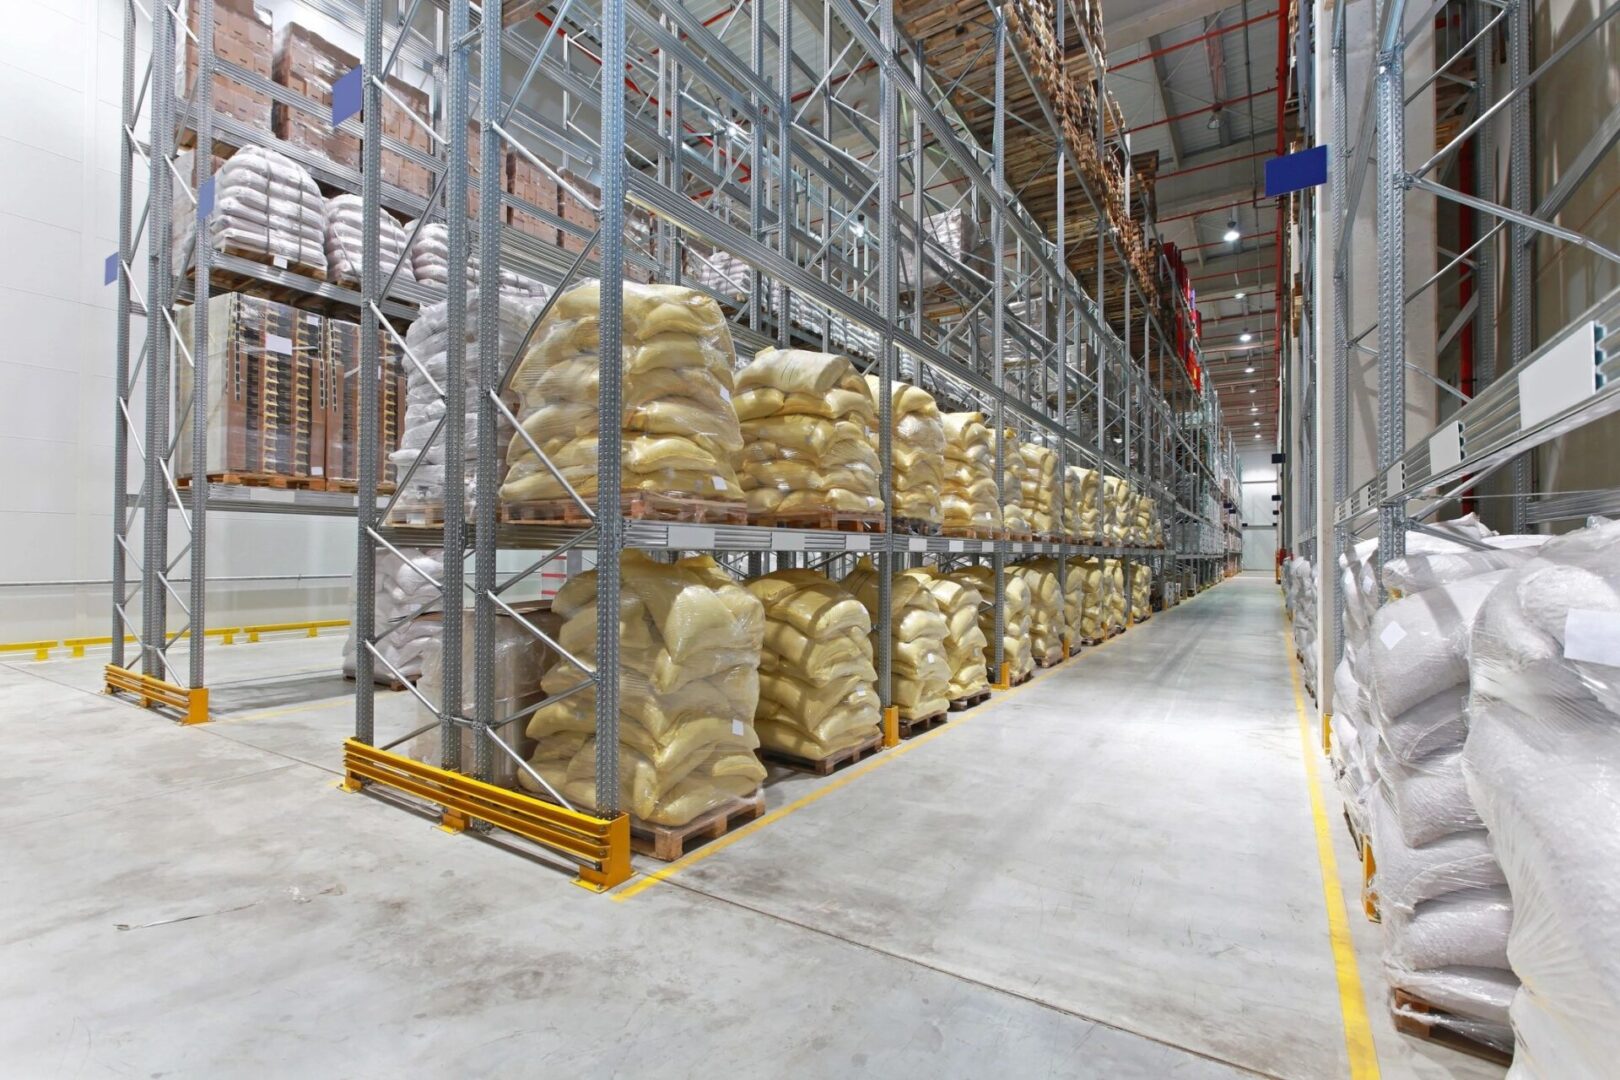 A warehouse filled with lots of bags of food.